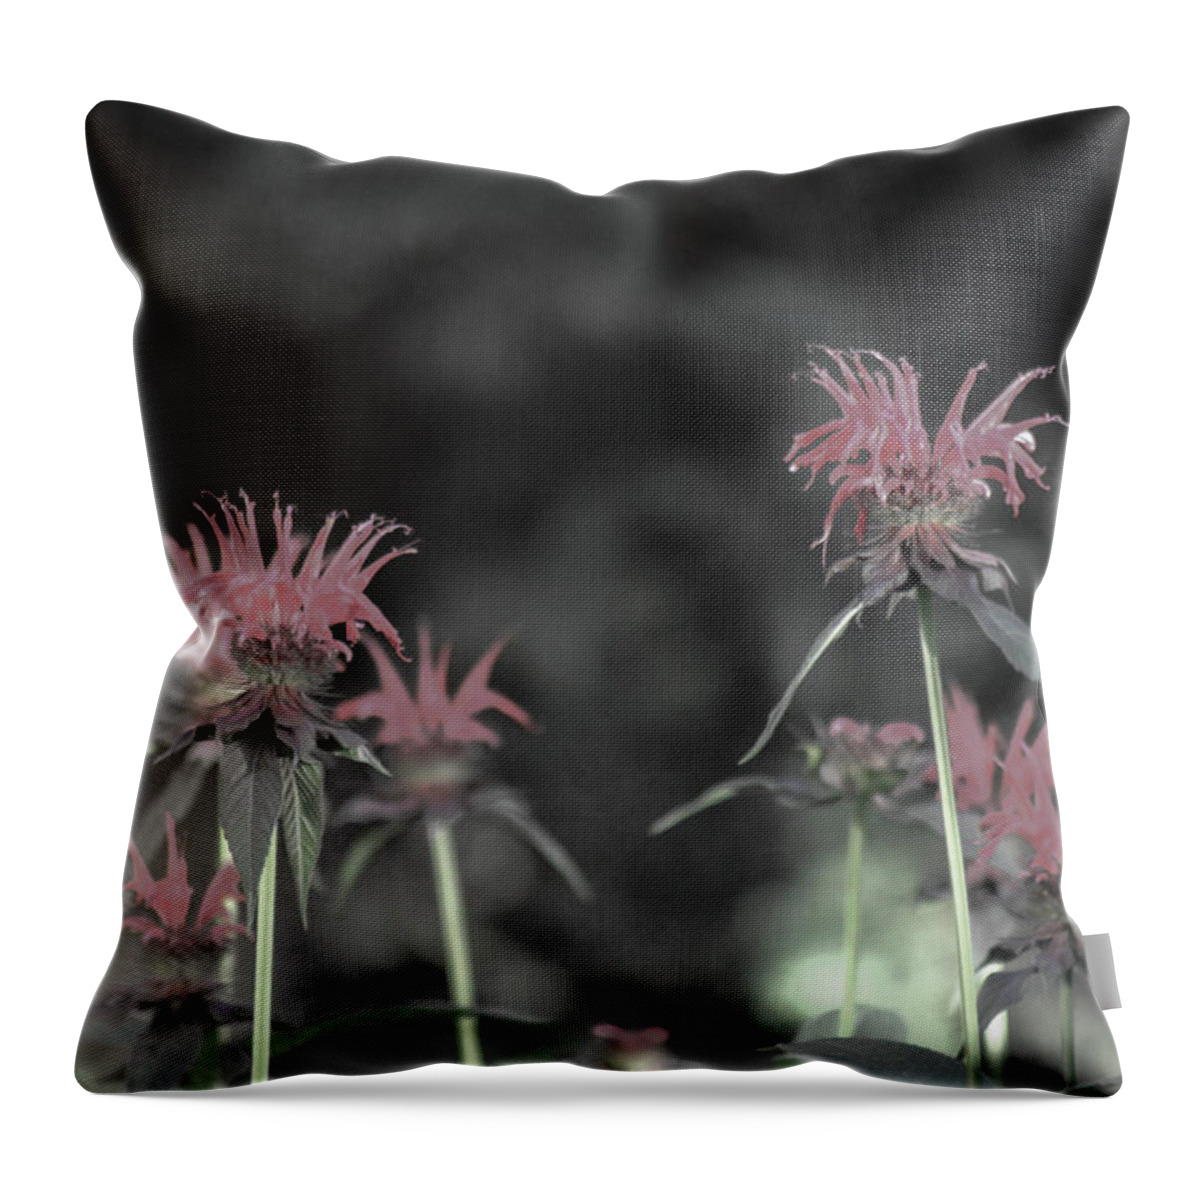 Flowers Throw Pillow featuring the photograph Flowers by Julien Boutin